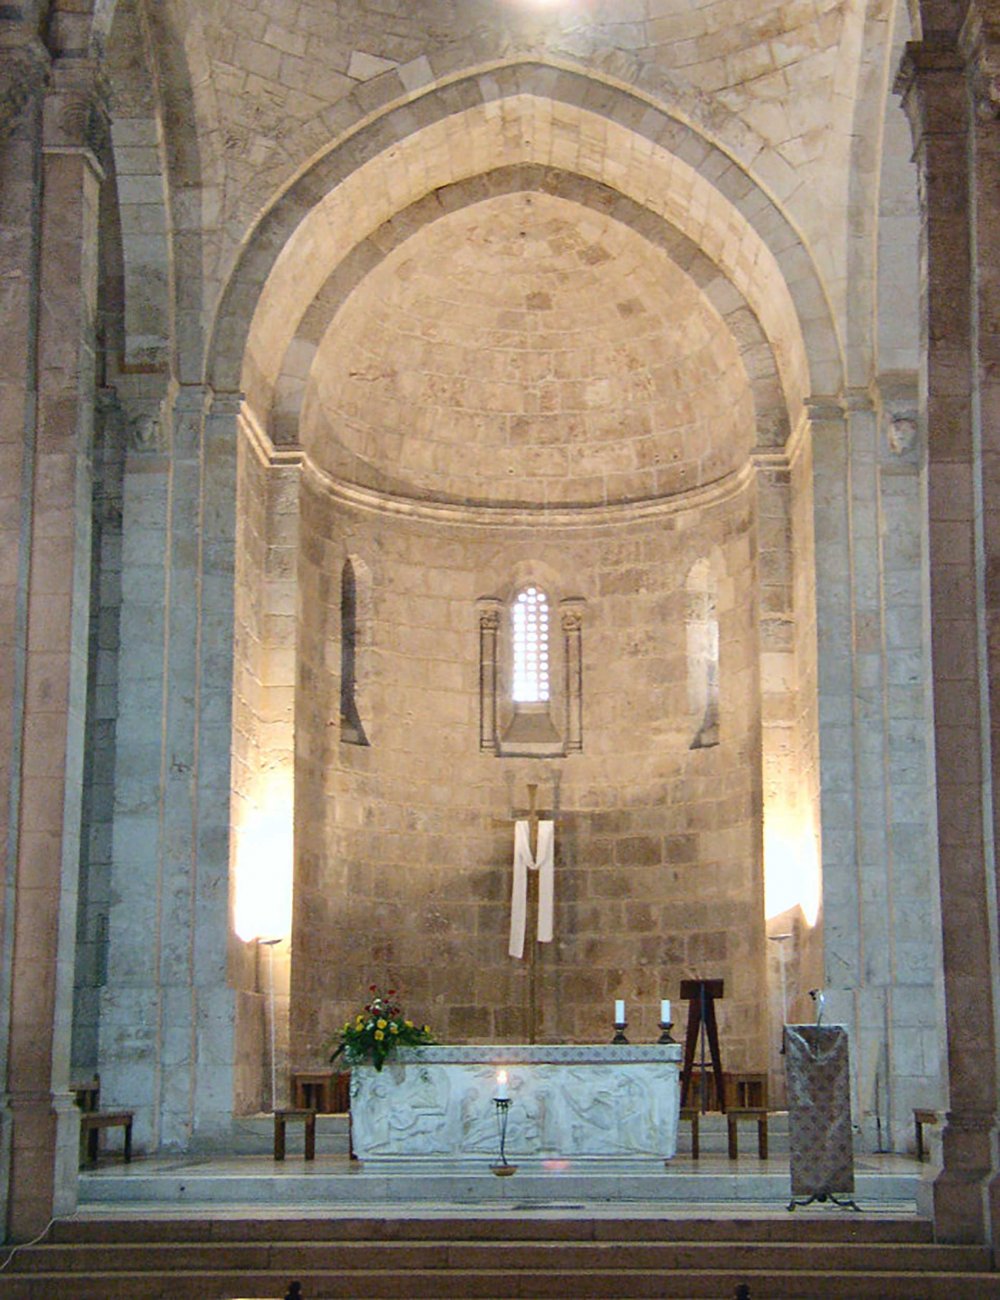 Church of St. Anne in Jerusalem, completed in 1138